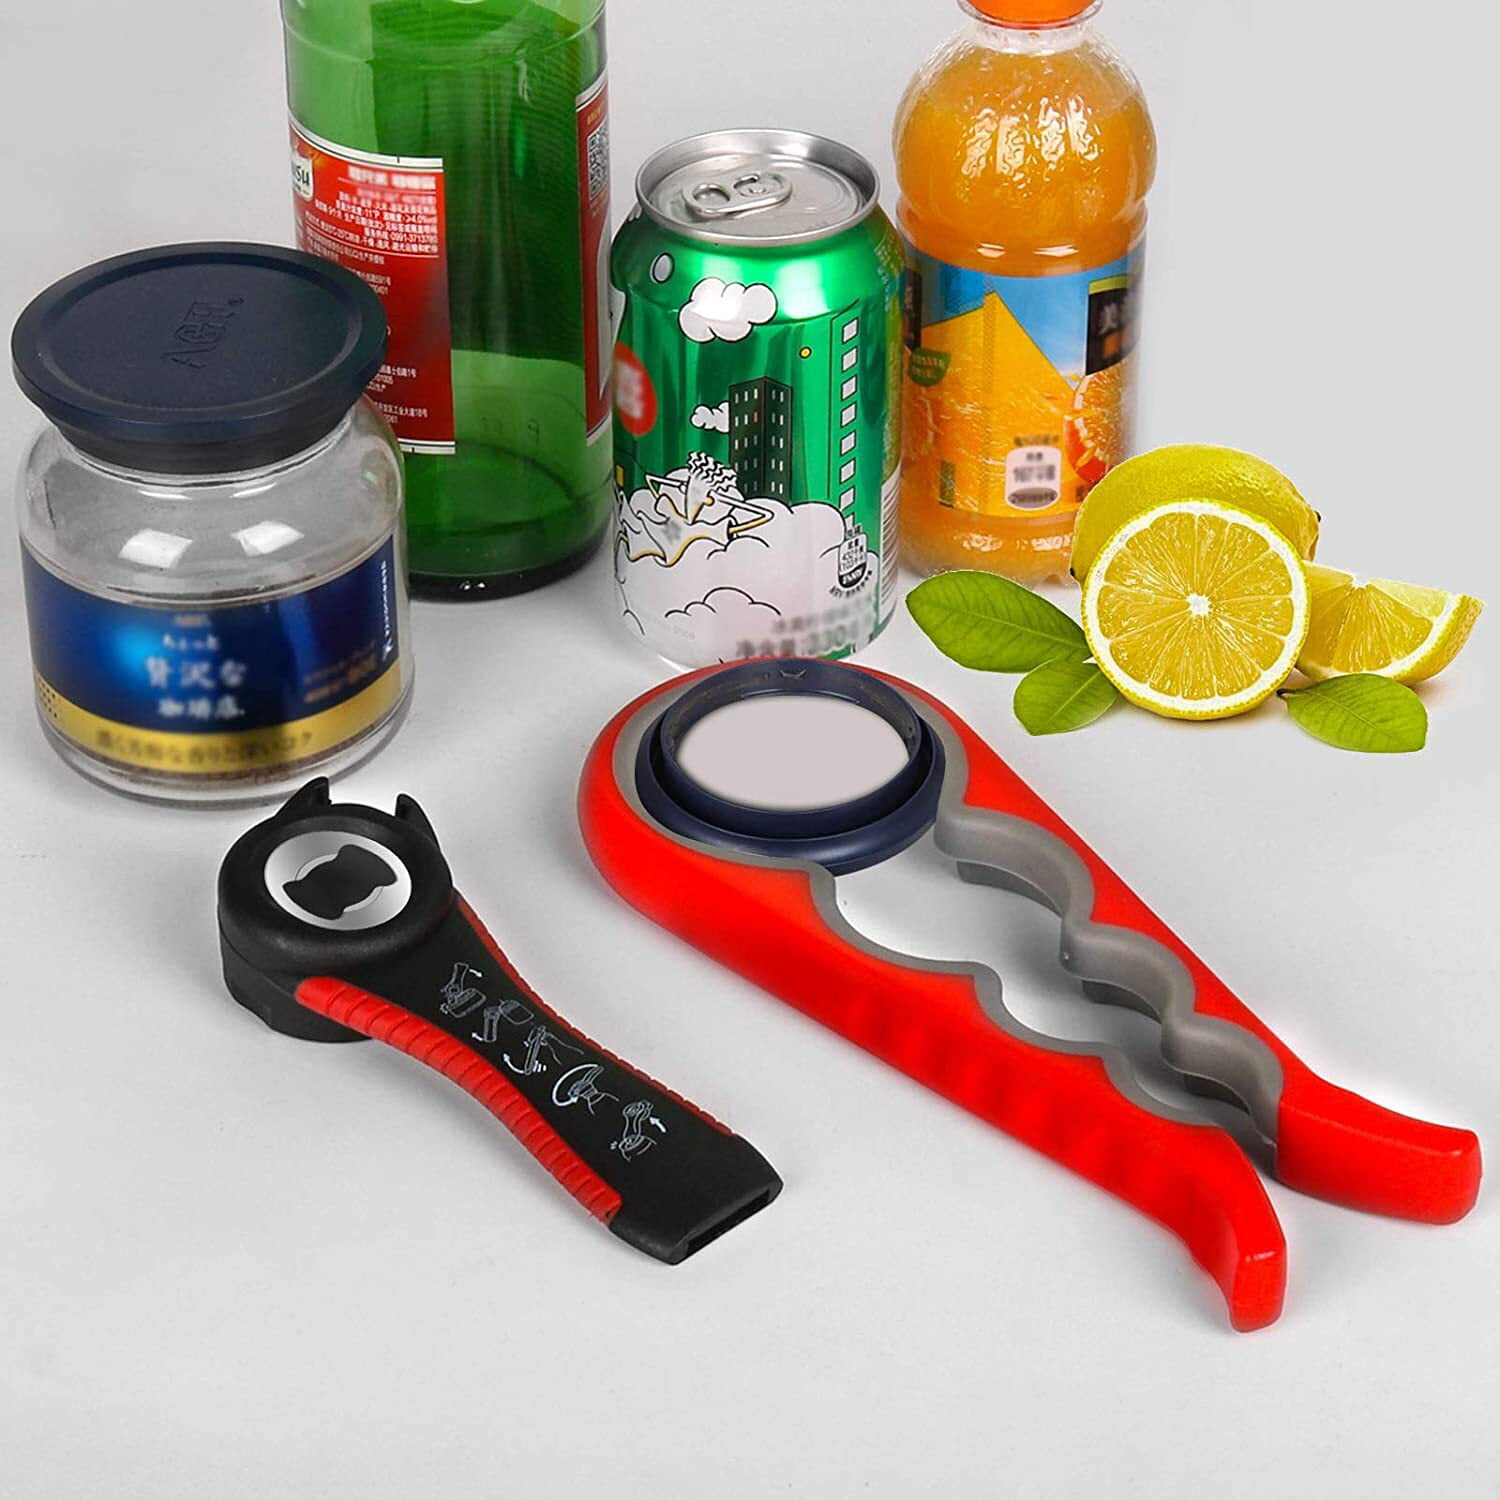 Jar Opener, 5 in 1 Multi Function Can Opener Bottle Opener Kit with  Silicone Handle Easy to Use for Children, Elderly and Arthritis Sufferers  (Apple Red）: Home & Kitchen 